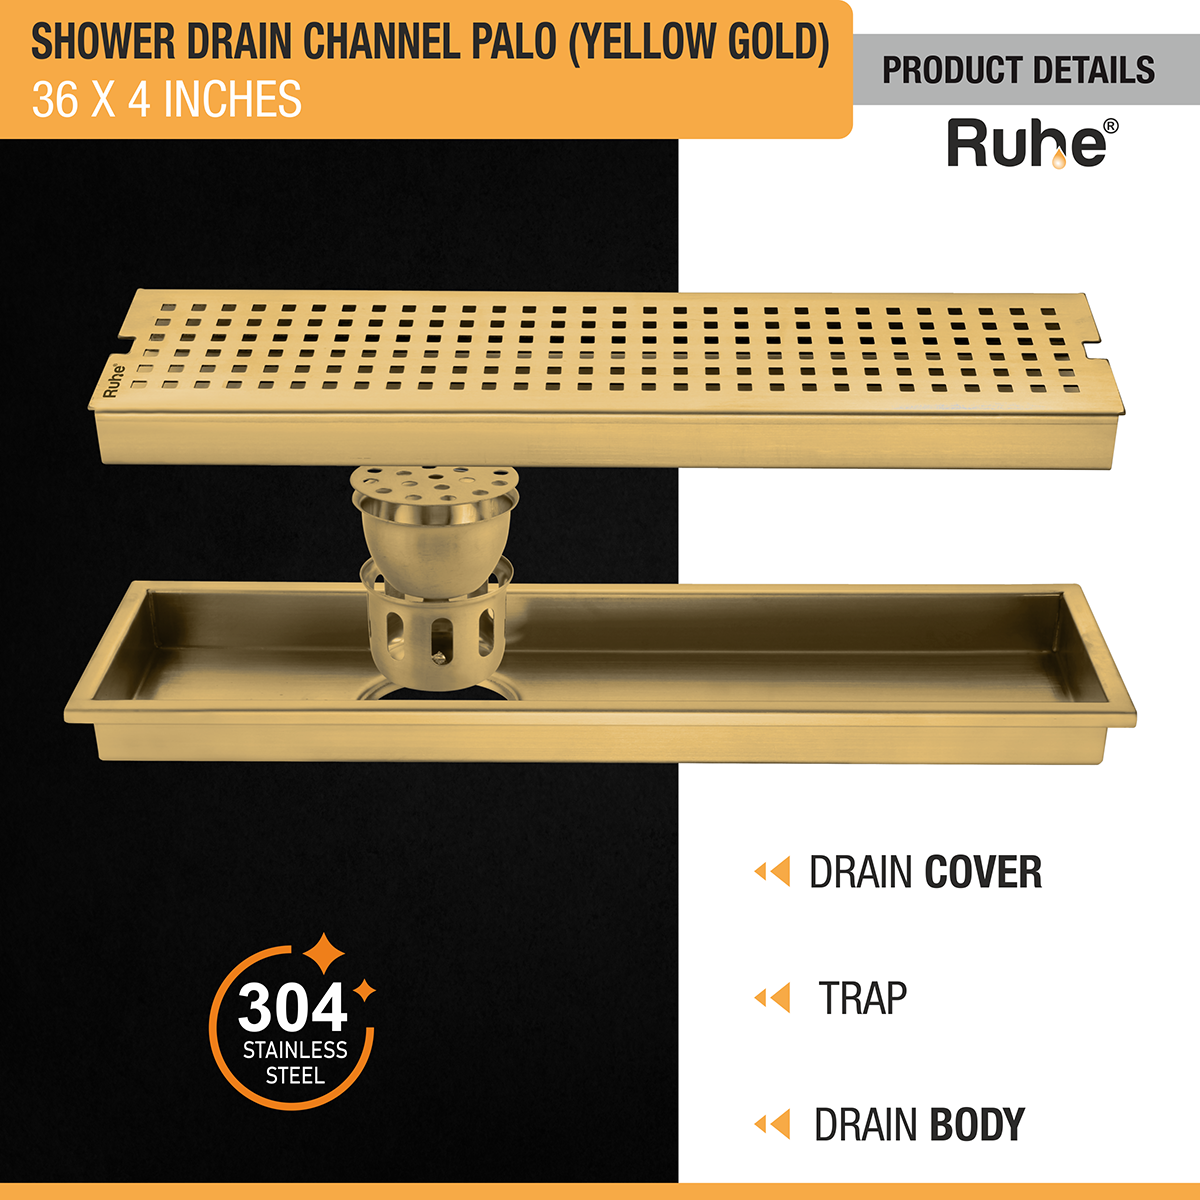 Palo Shower Drain Channel (36 x 4 Inches) YELLOW GOLD product details